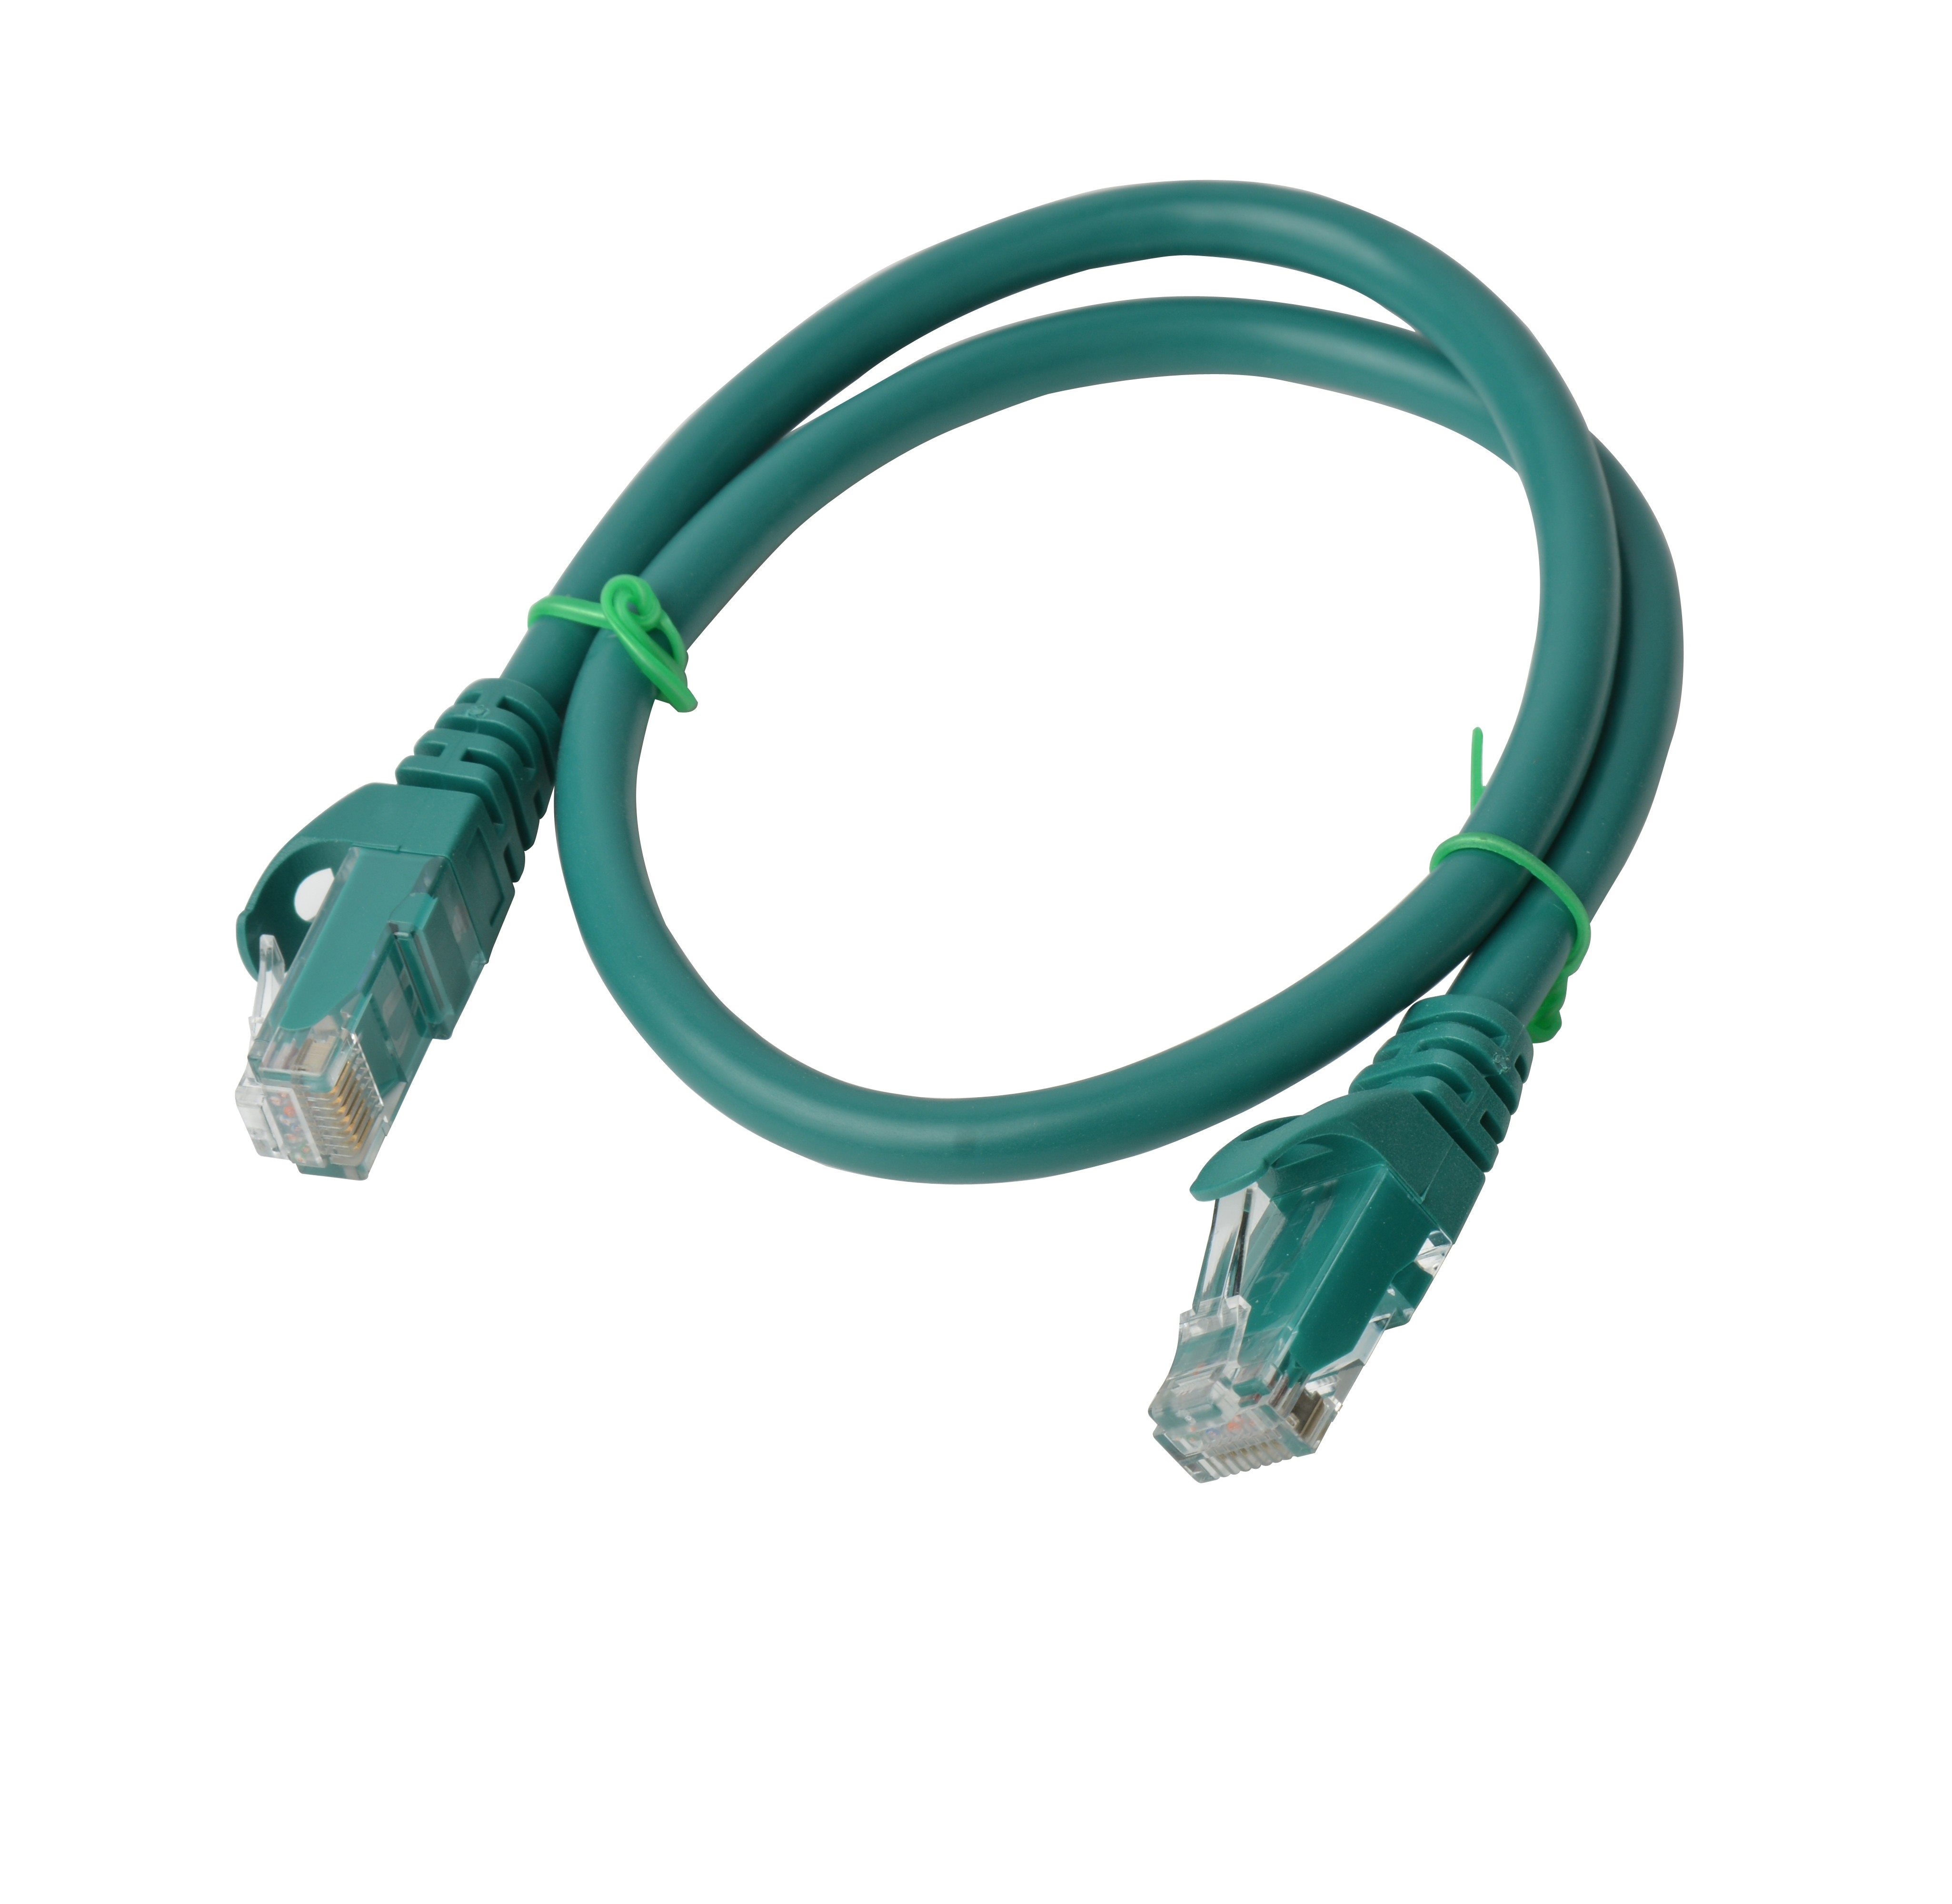 8Ware Cat 6A Utp Ethernet Cable, Snagless&#160; - 0.25M (25CM) Green